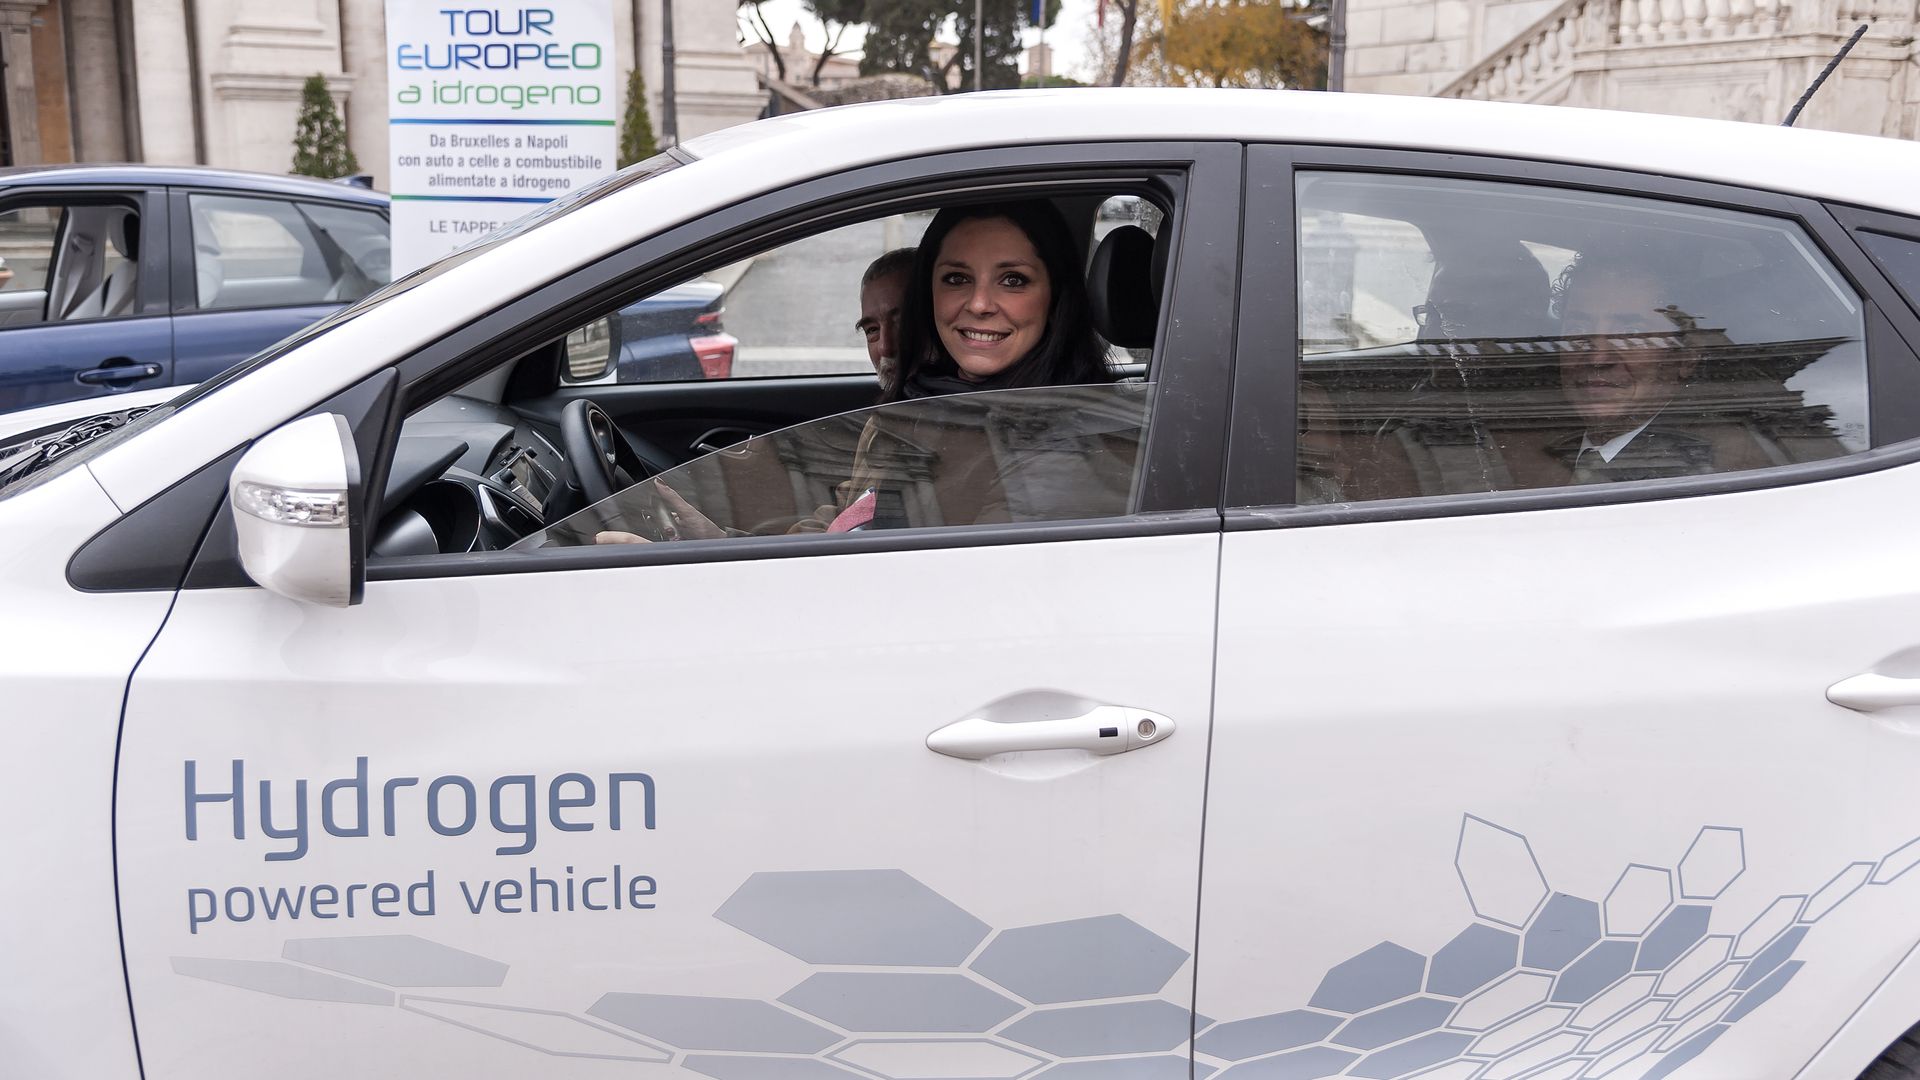  Linda Meleo Councillor for Mobility of Rome driving a hydrogen car in Campidoglio on December 9, 2017, in Rome, Italy. 